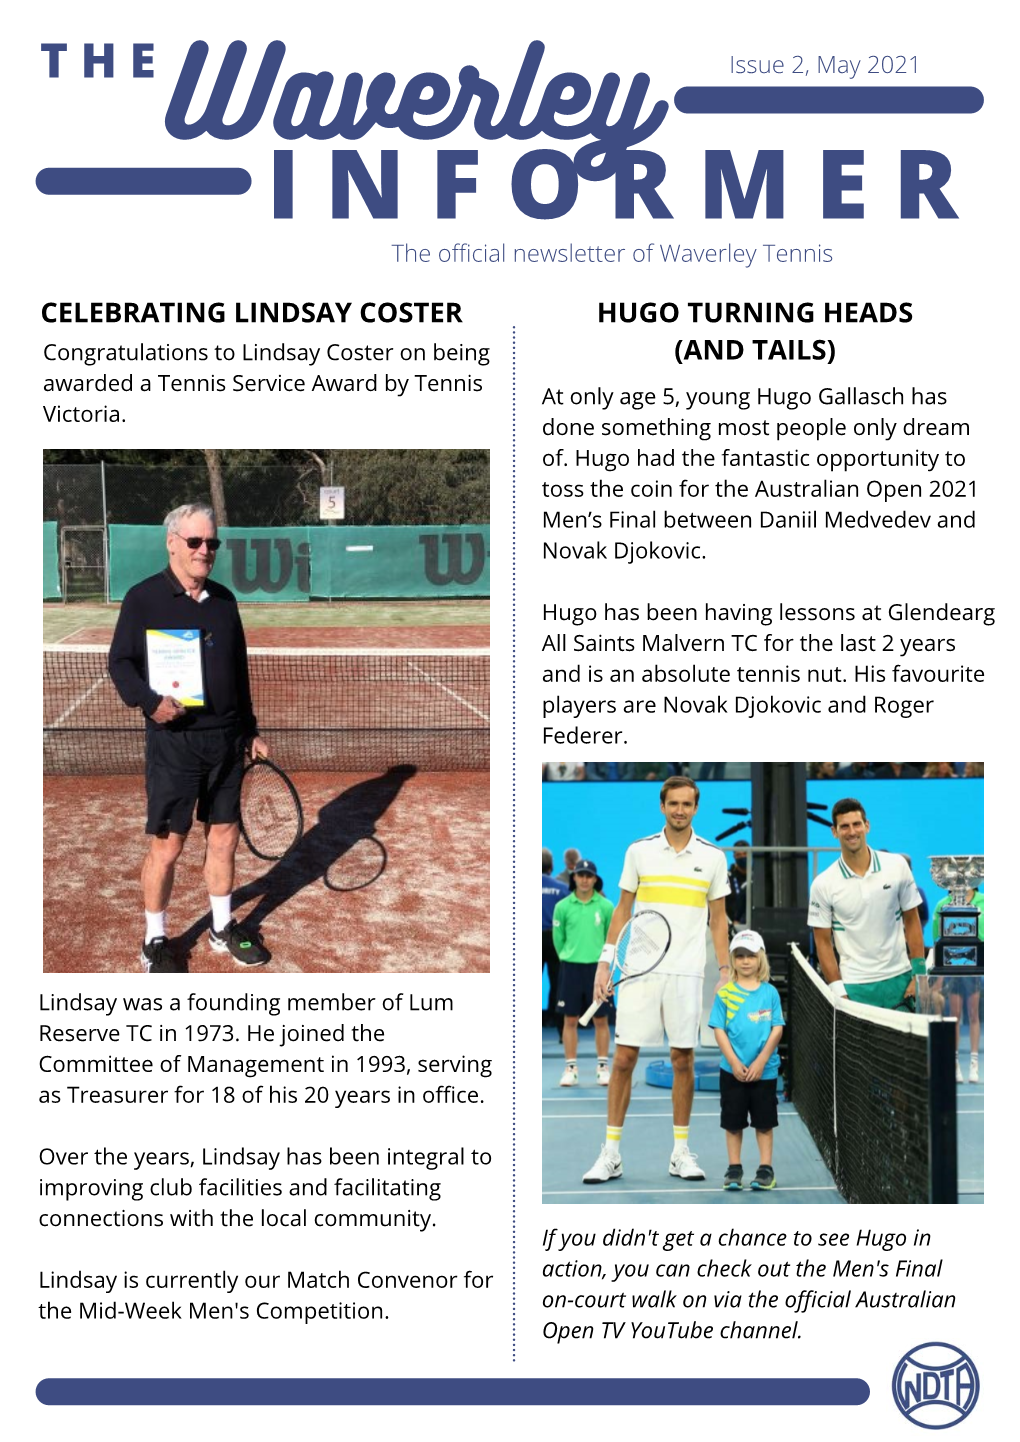 I N F O R M E R the Official Newsletter of Waverley Tennis